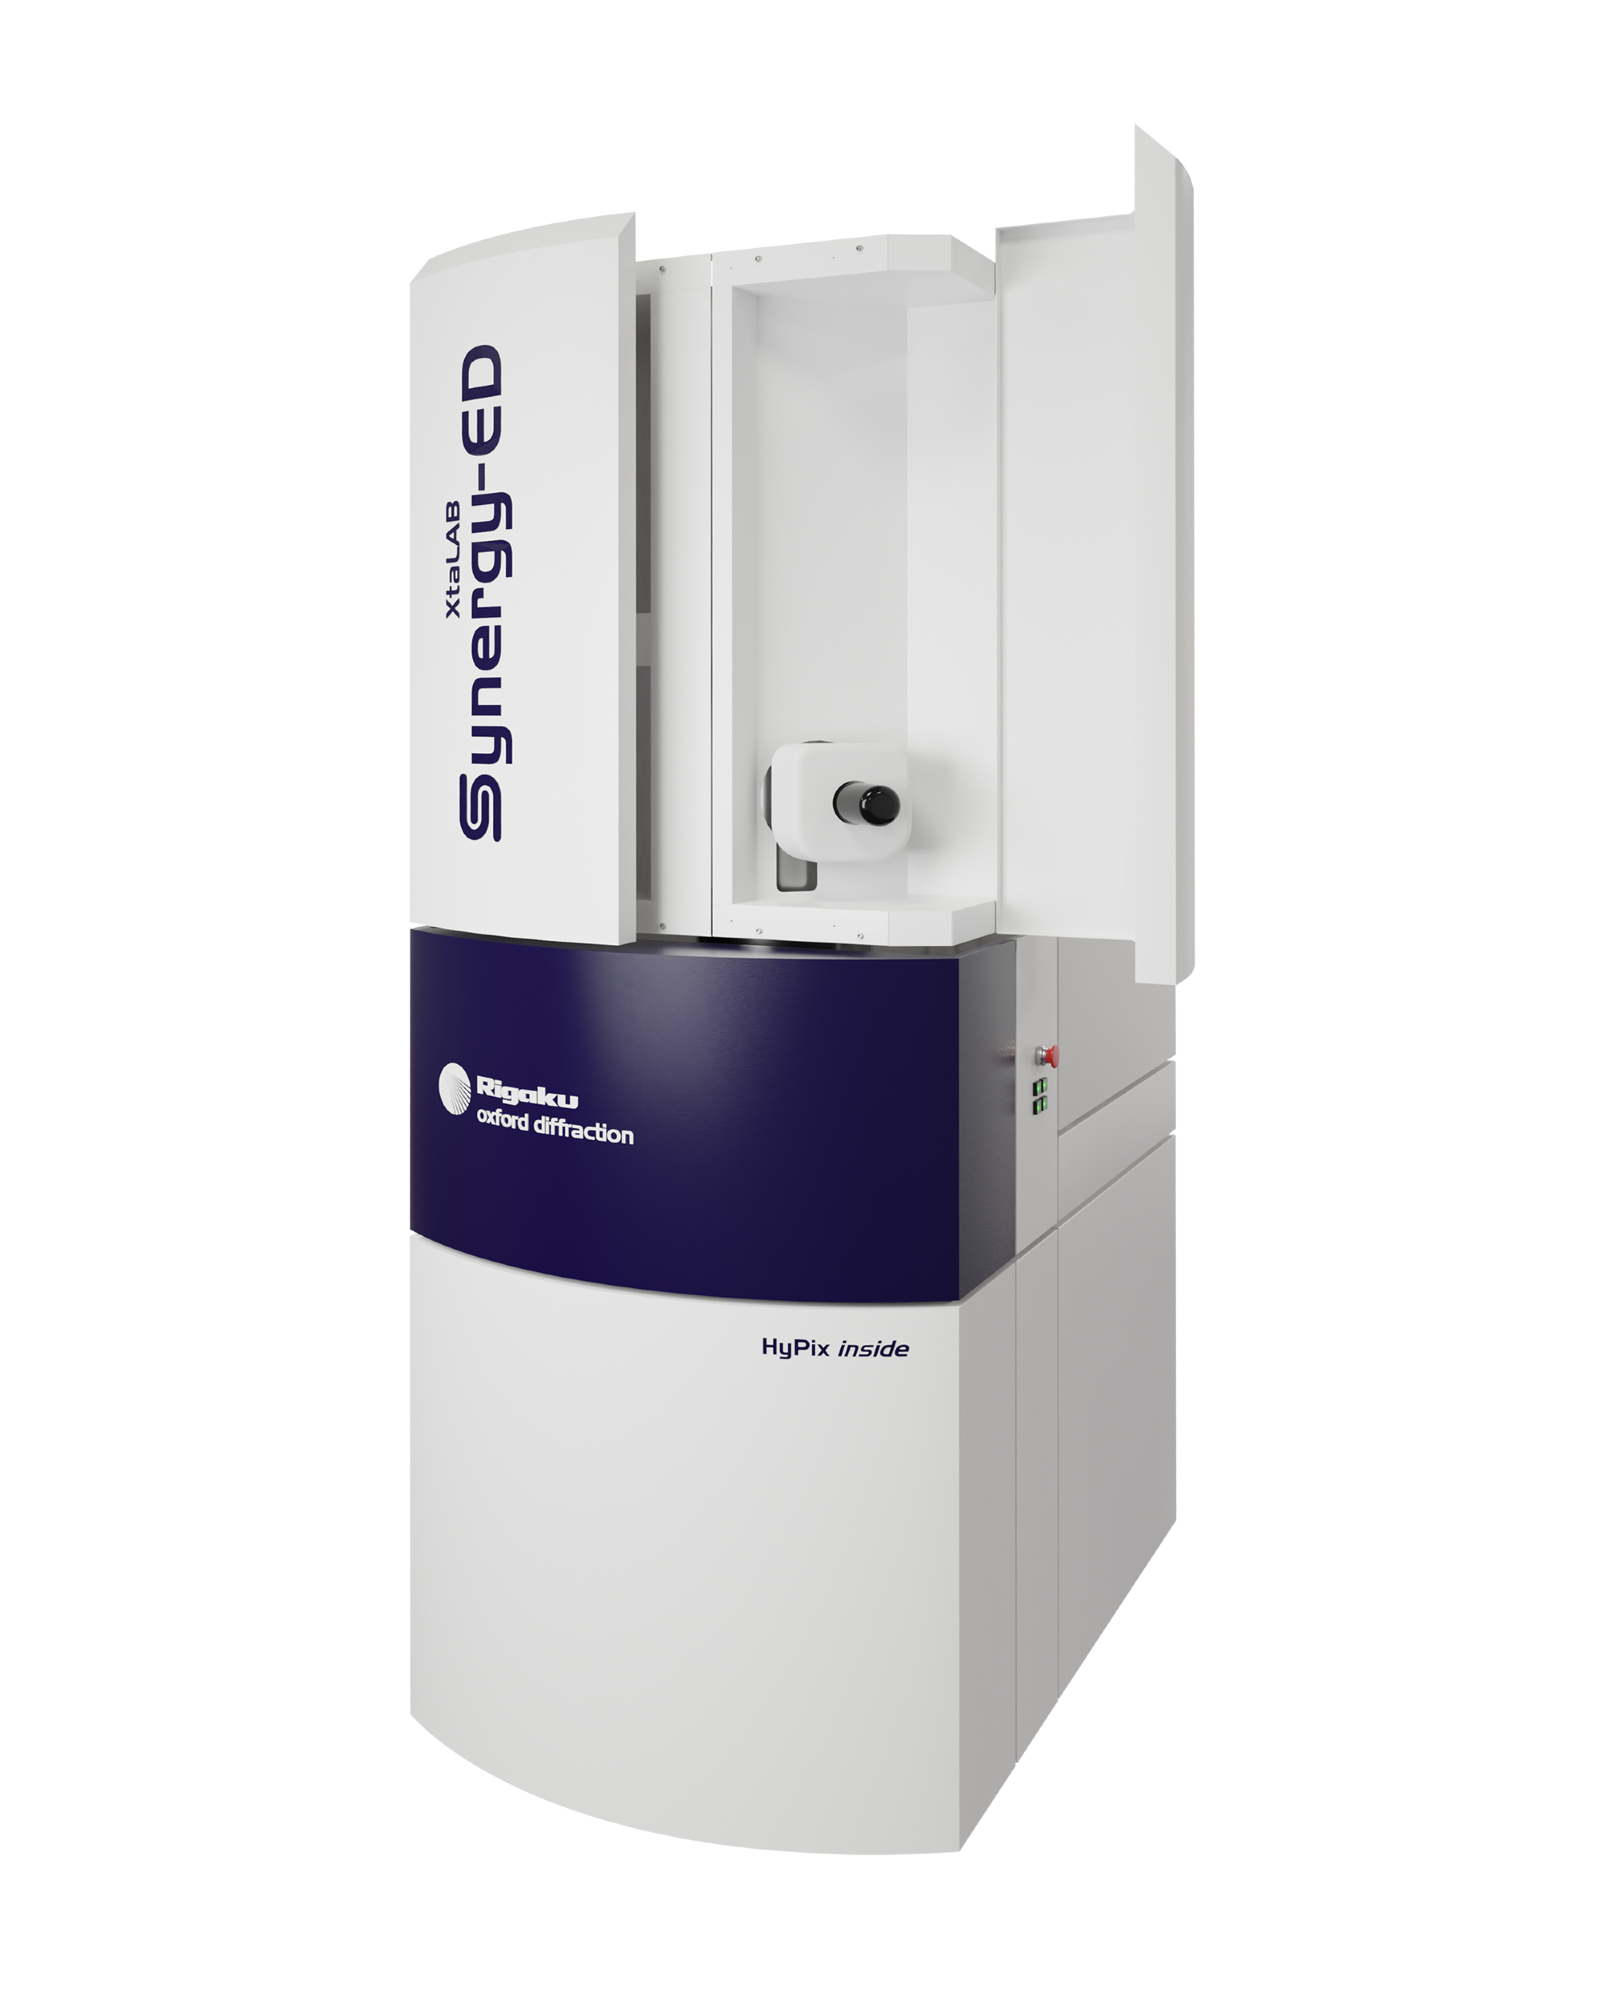 XtaLAB Synergy-ED – Electron Diffractometer